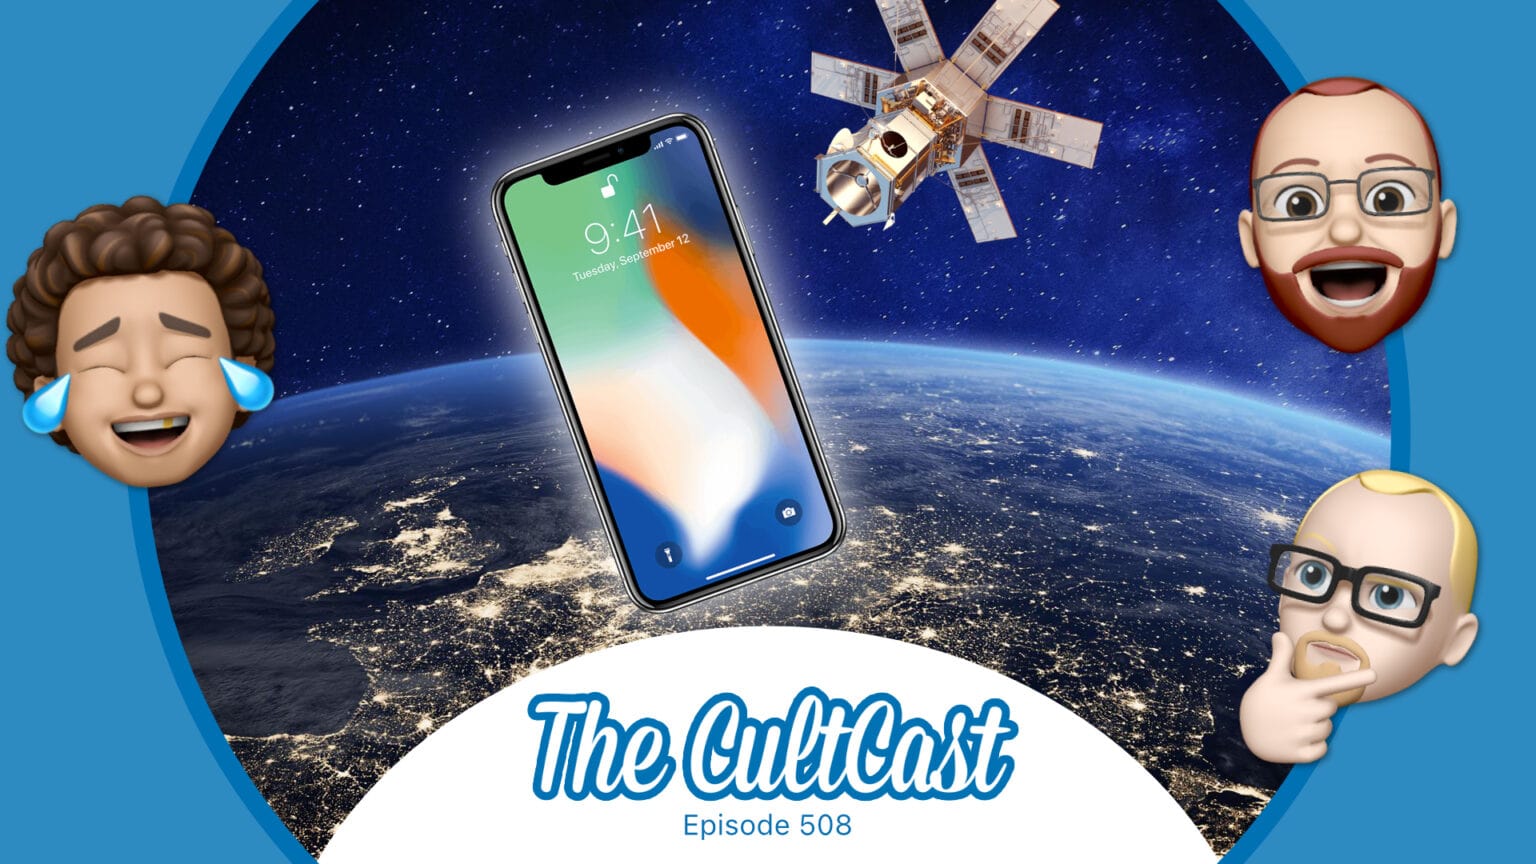 Cult of Mac podcast: This week on The CultCast, we talk iPhone 13's satellite secret.